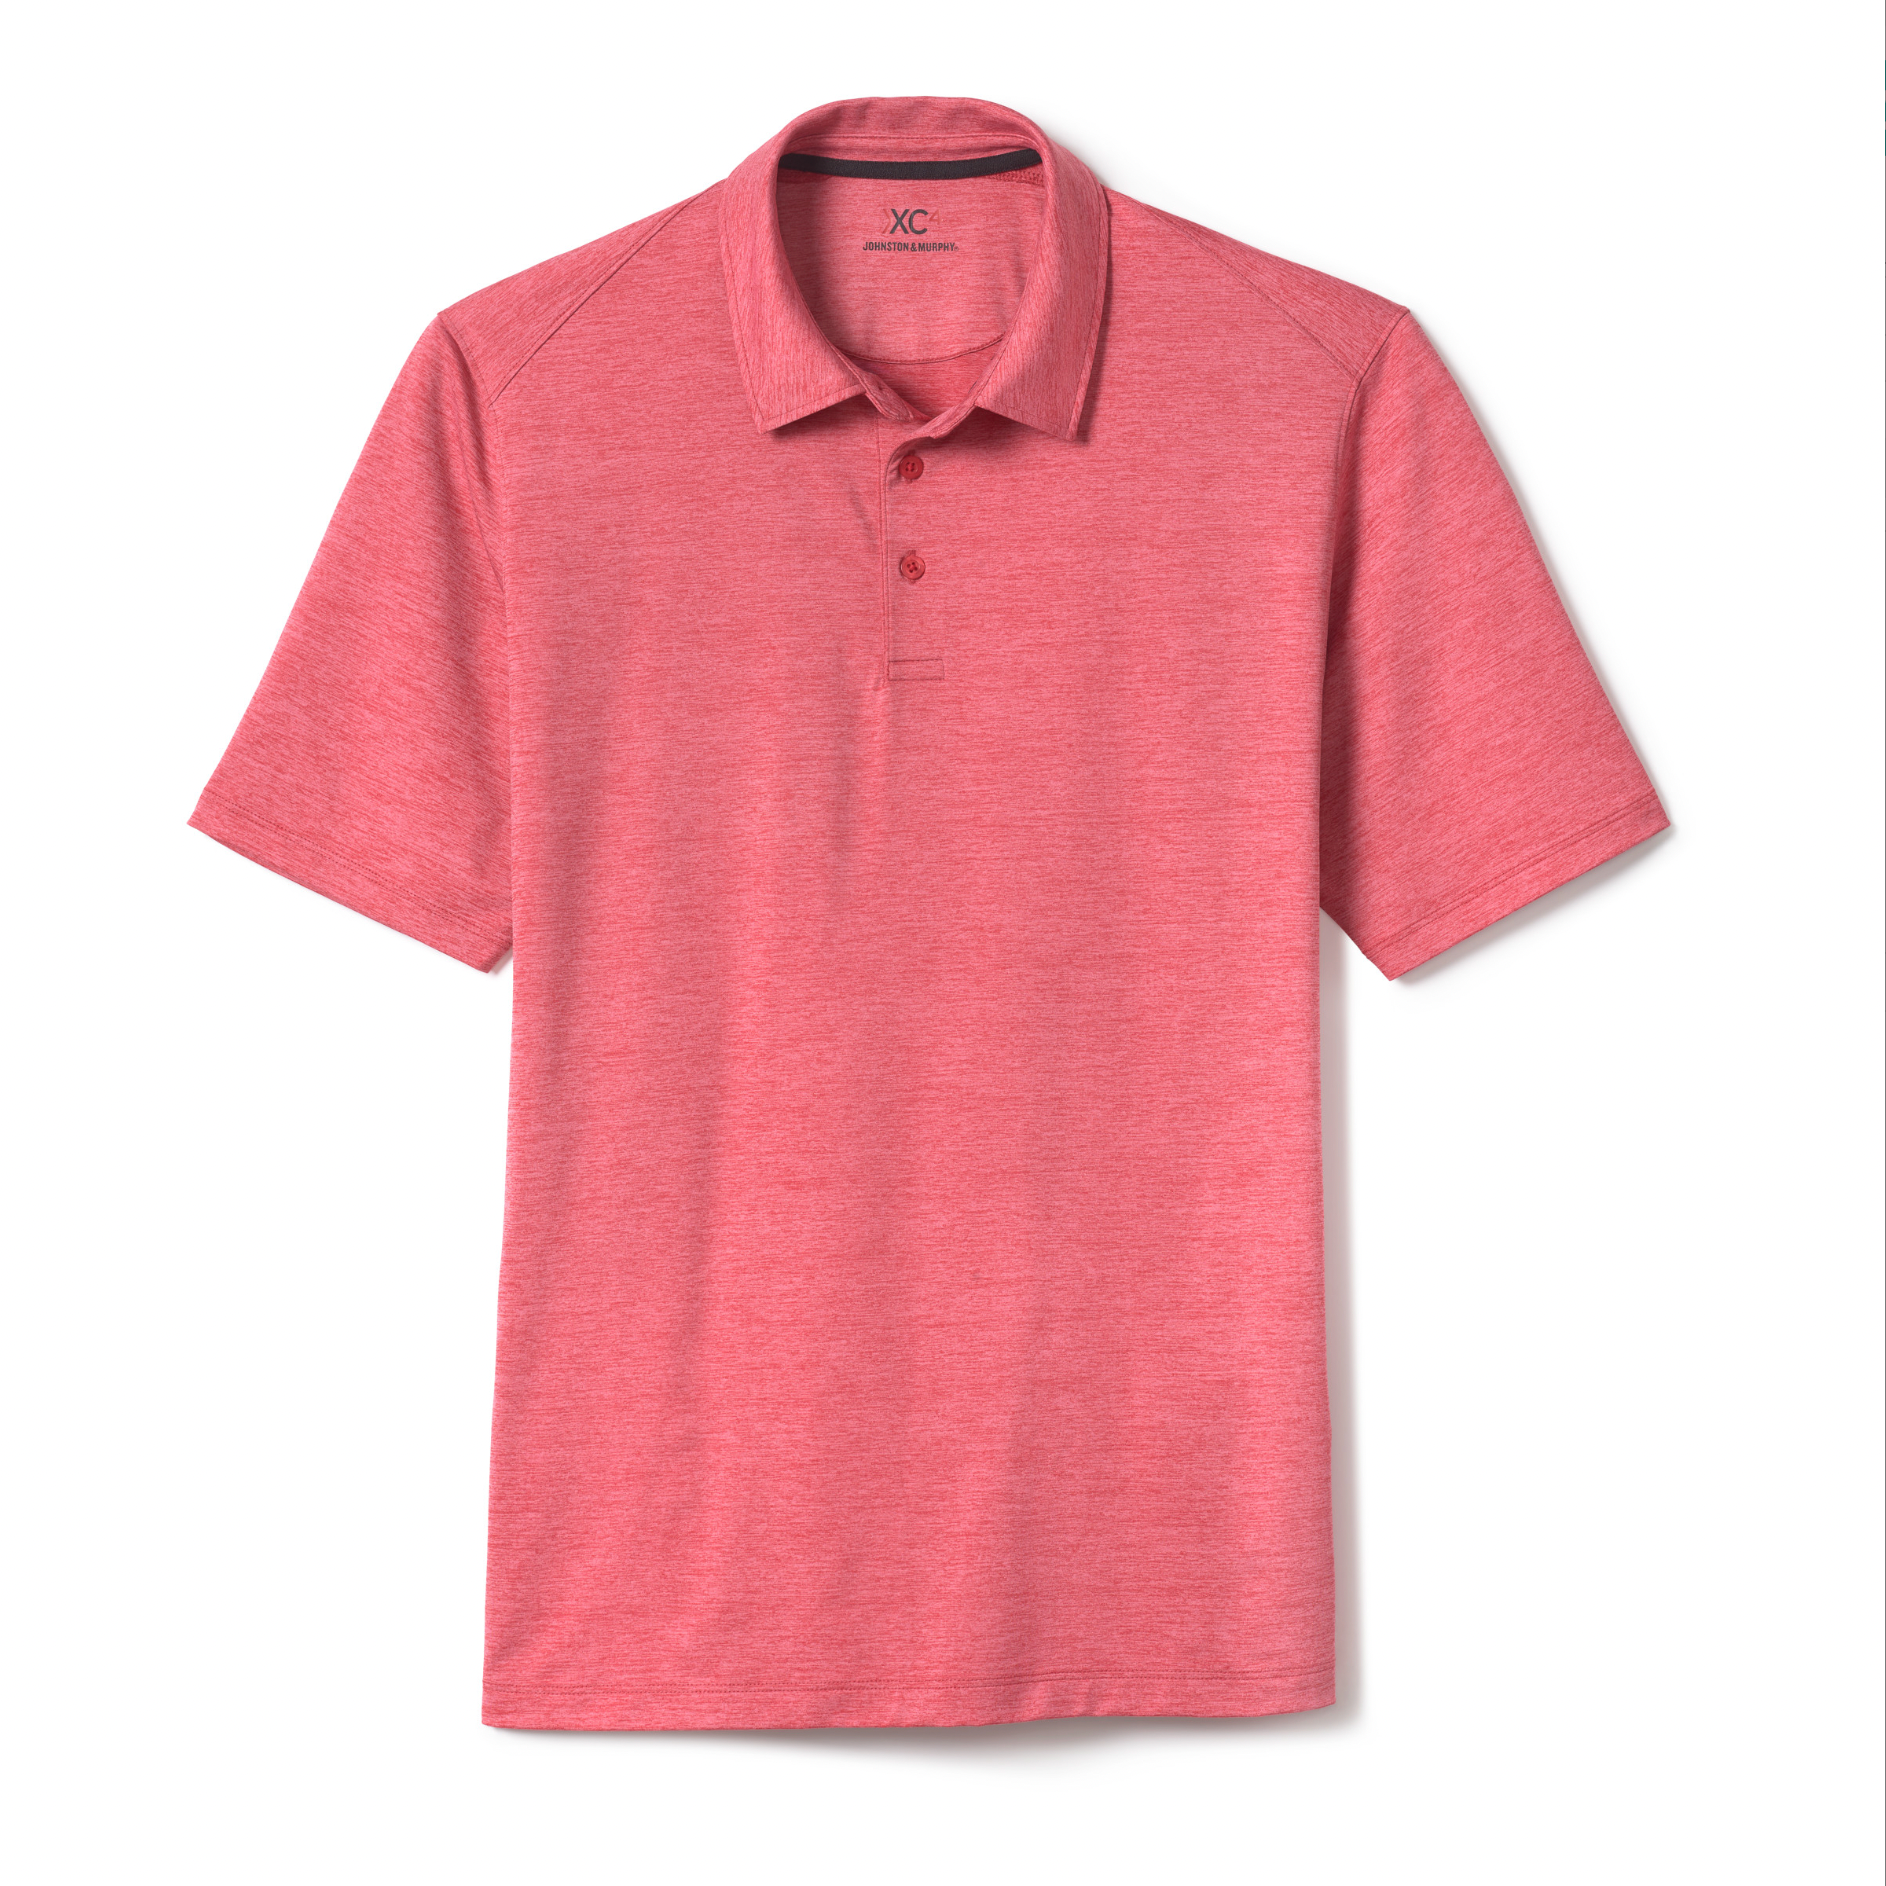 Experience style and comfort with the Johnston&Murphy XC4 Solid Performance Polo! This polo offers exceptional performance and a sleek, solid design. Perfect for any occasion, this polo will keep you looking and feeling great all day long.